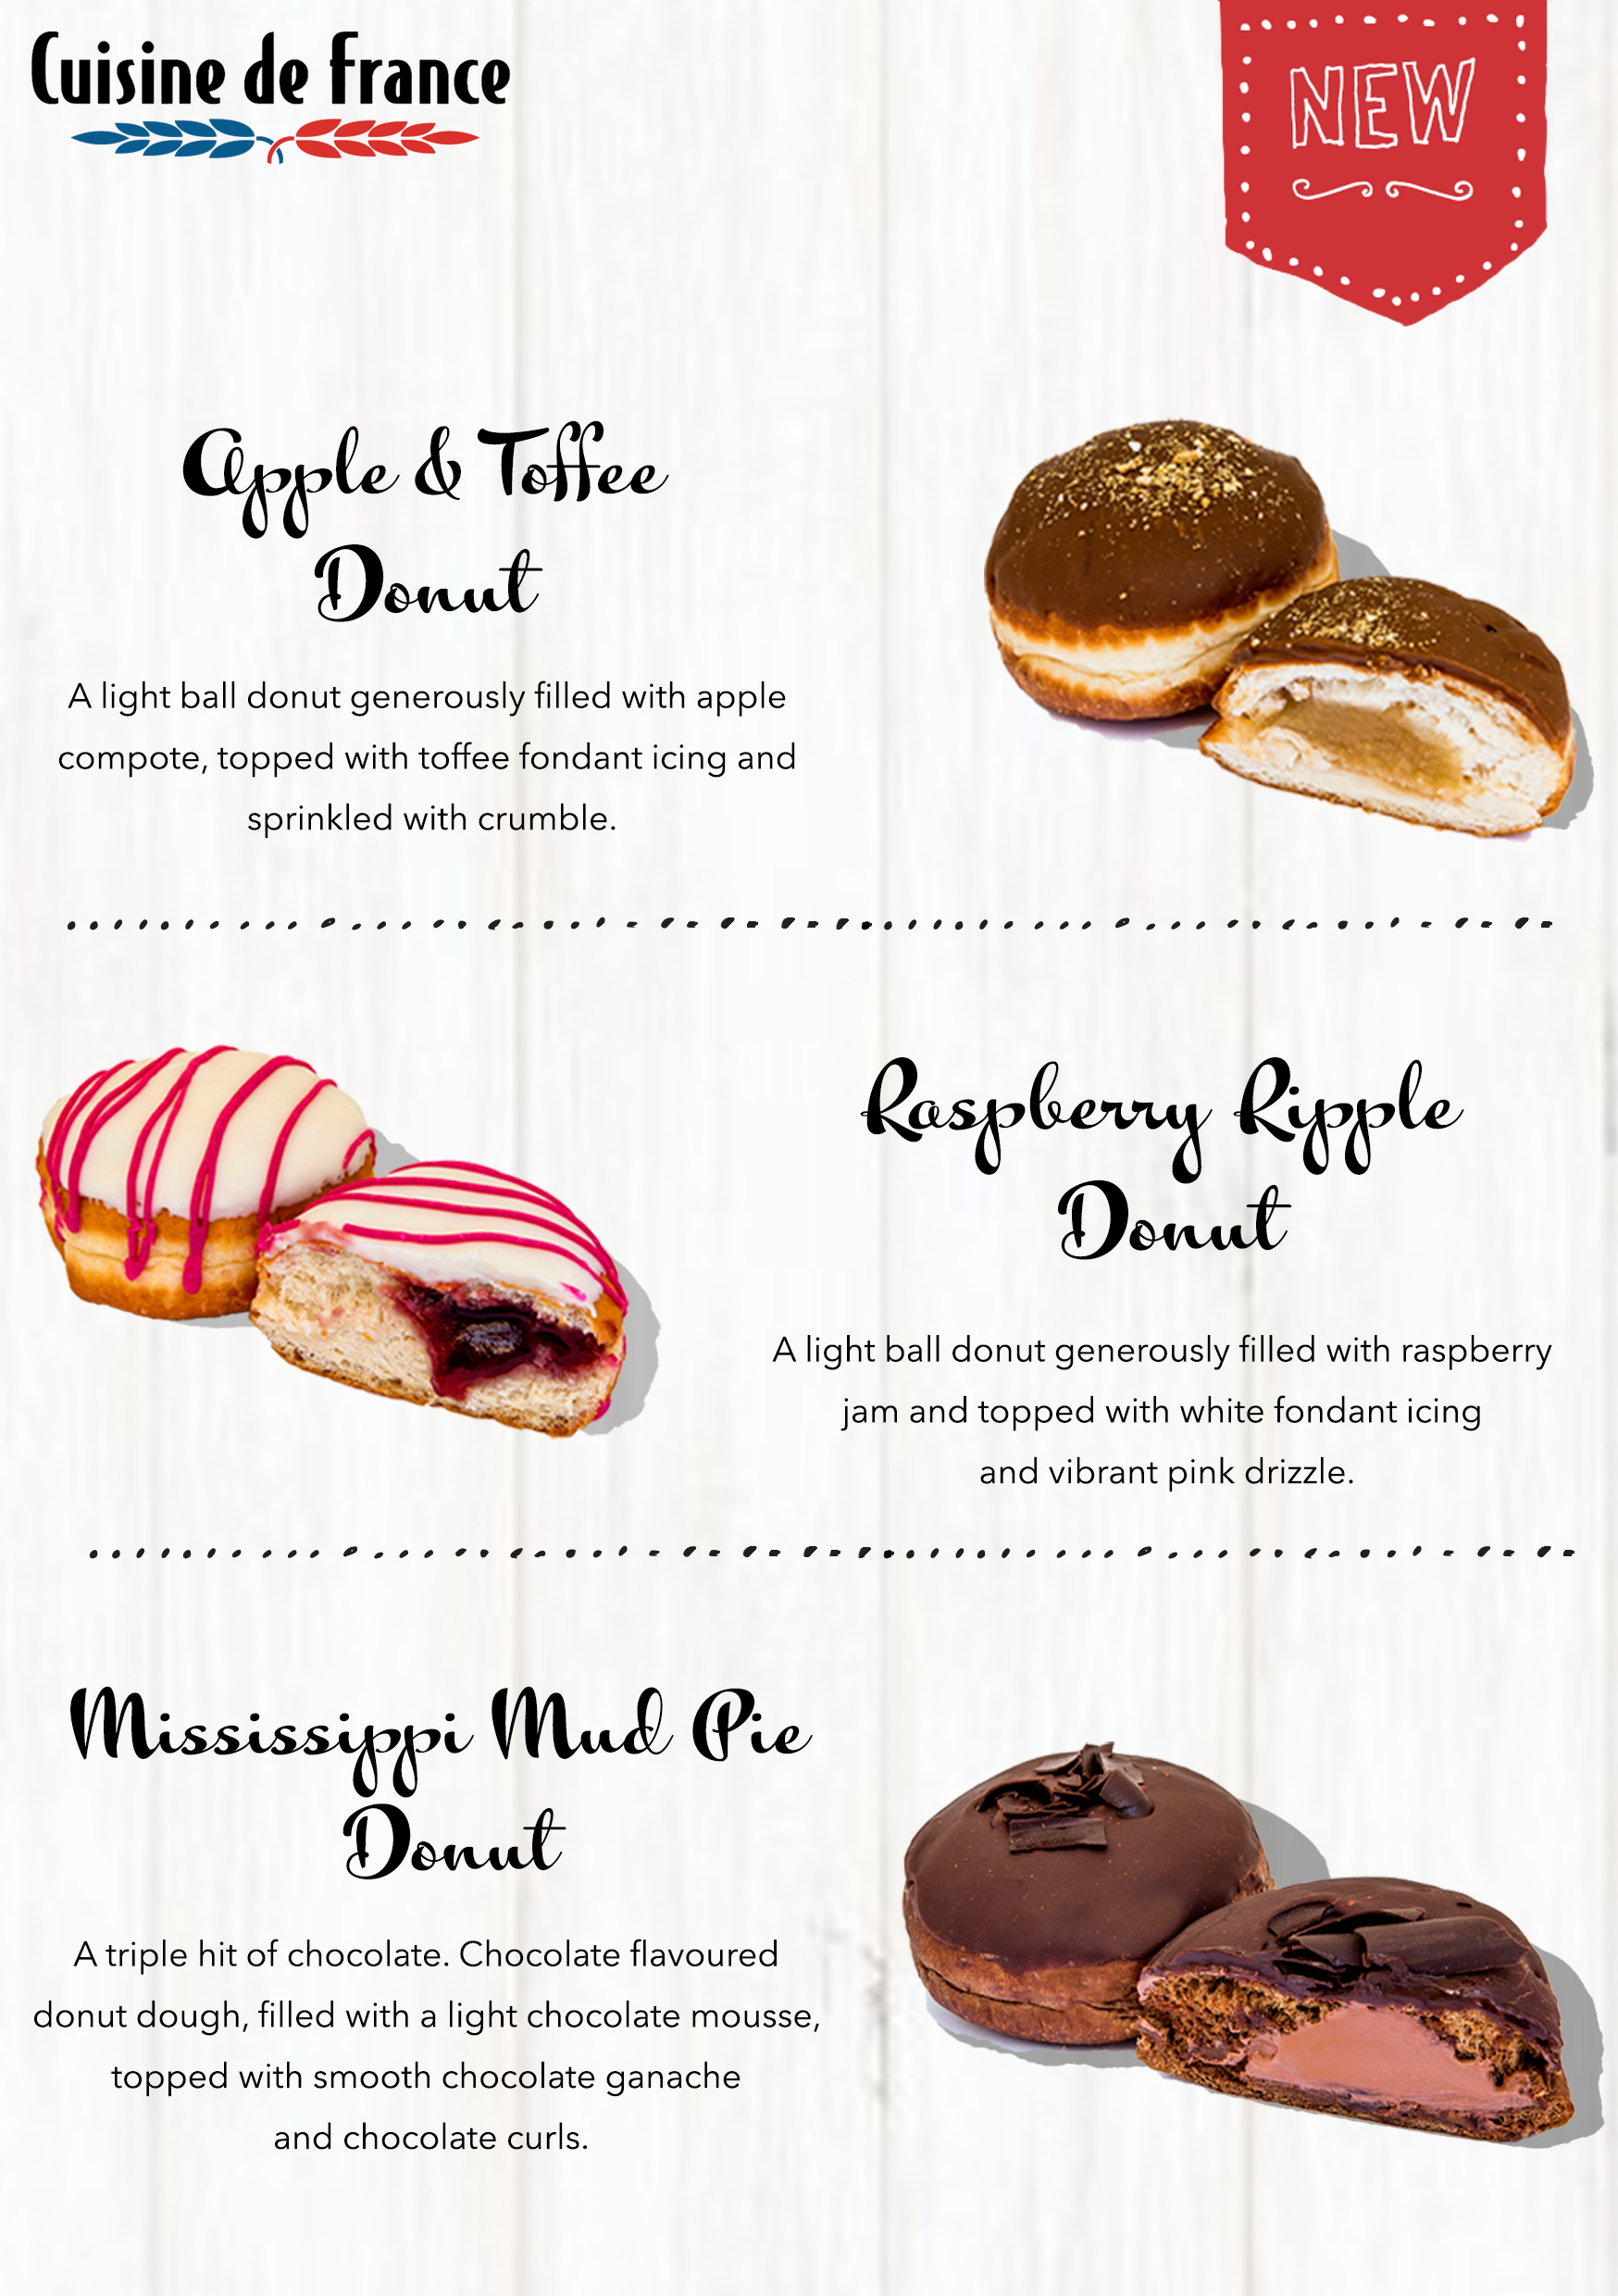 Description of the three new flavour filled donuts